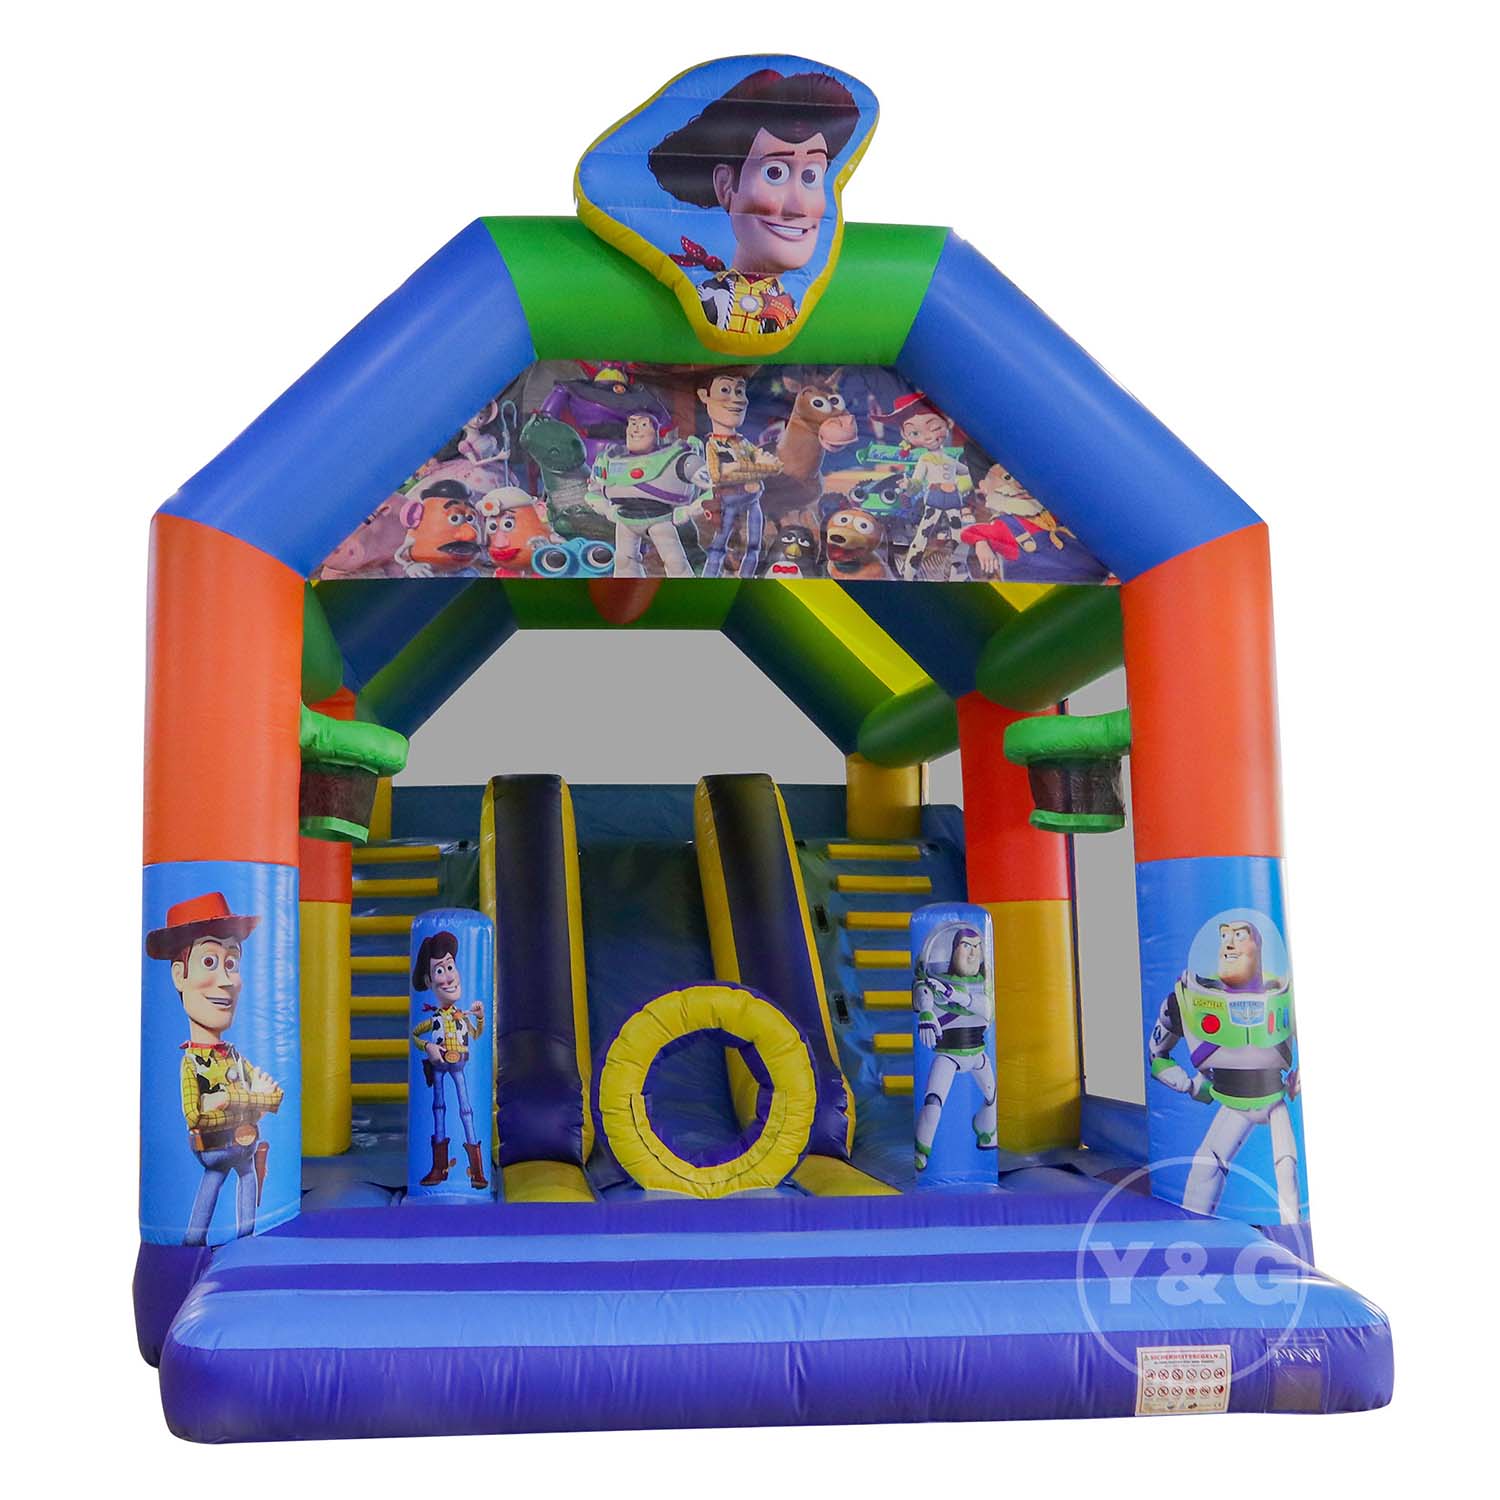 Toy Story Inflatable Bounce HouseYG-156